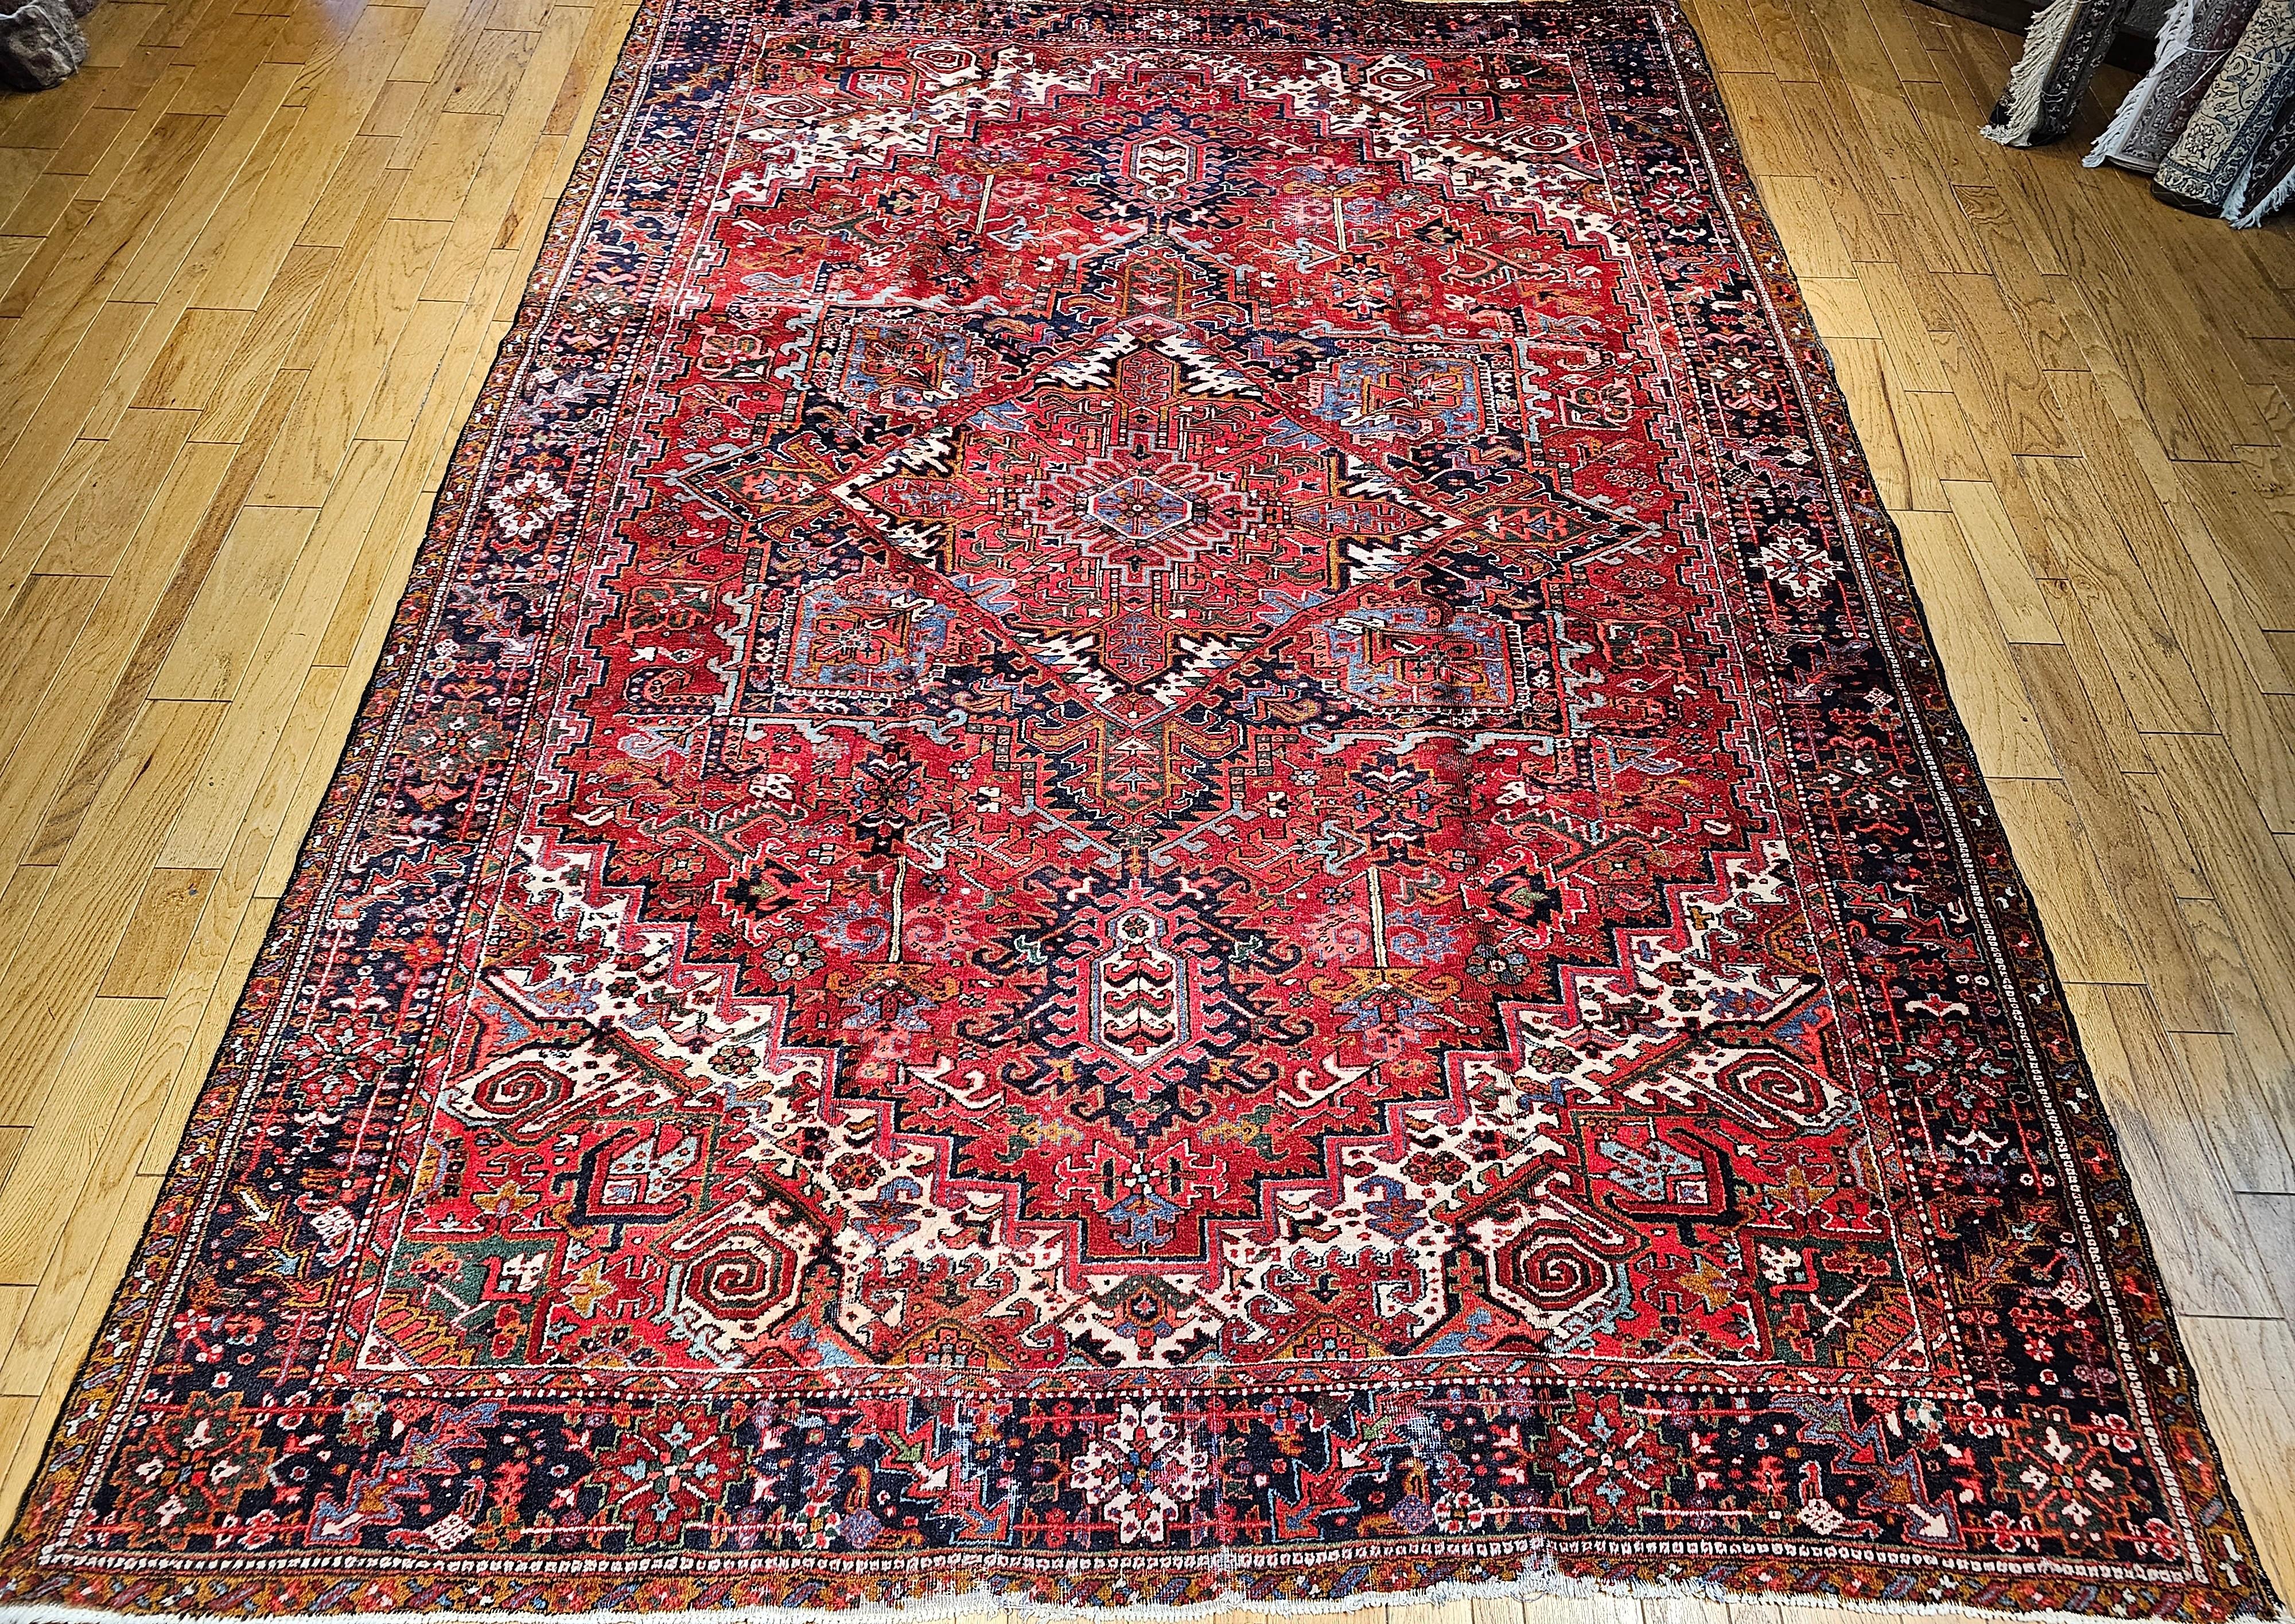 The vintage Persian  Heriz rug from the early 1900s has a great room size dimensions unlike most larger Heriz rugs that are narrow and long.  The rug comes in a geometric pattern with a central medallion in a beautiful red background.  The corner